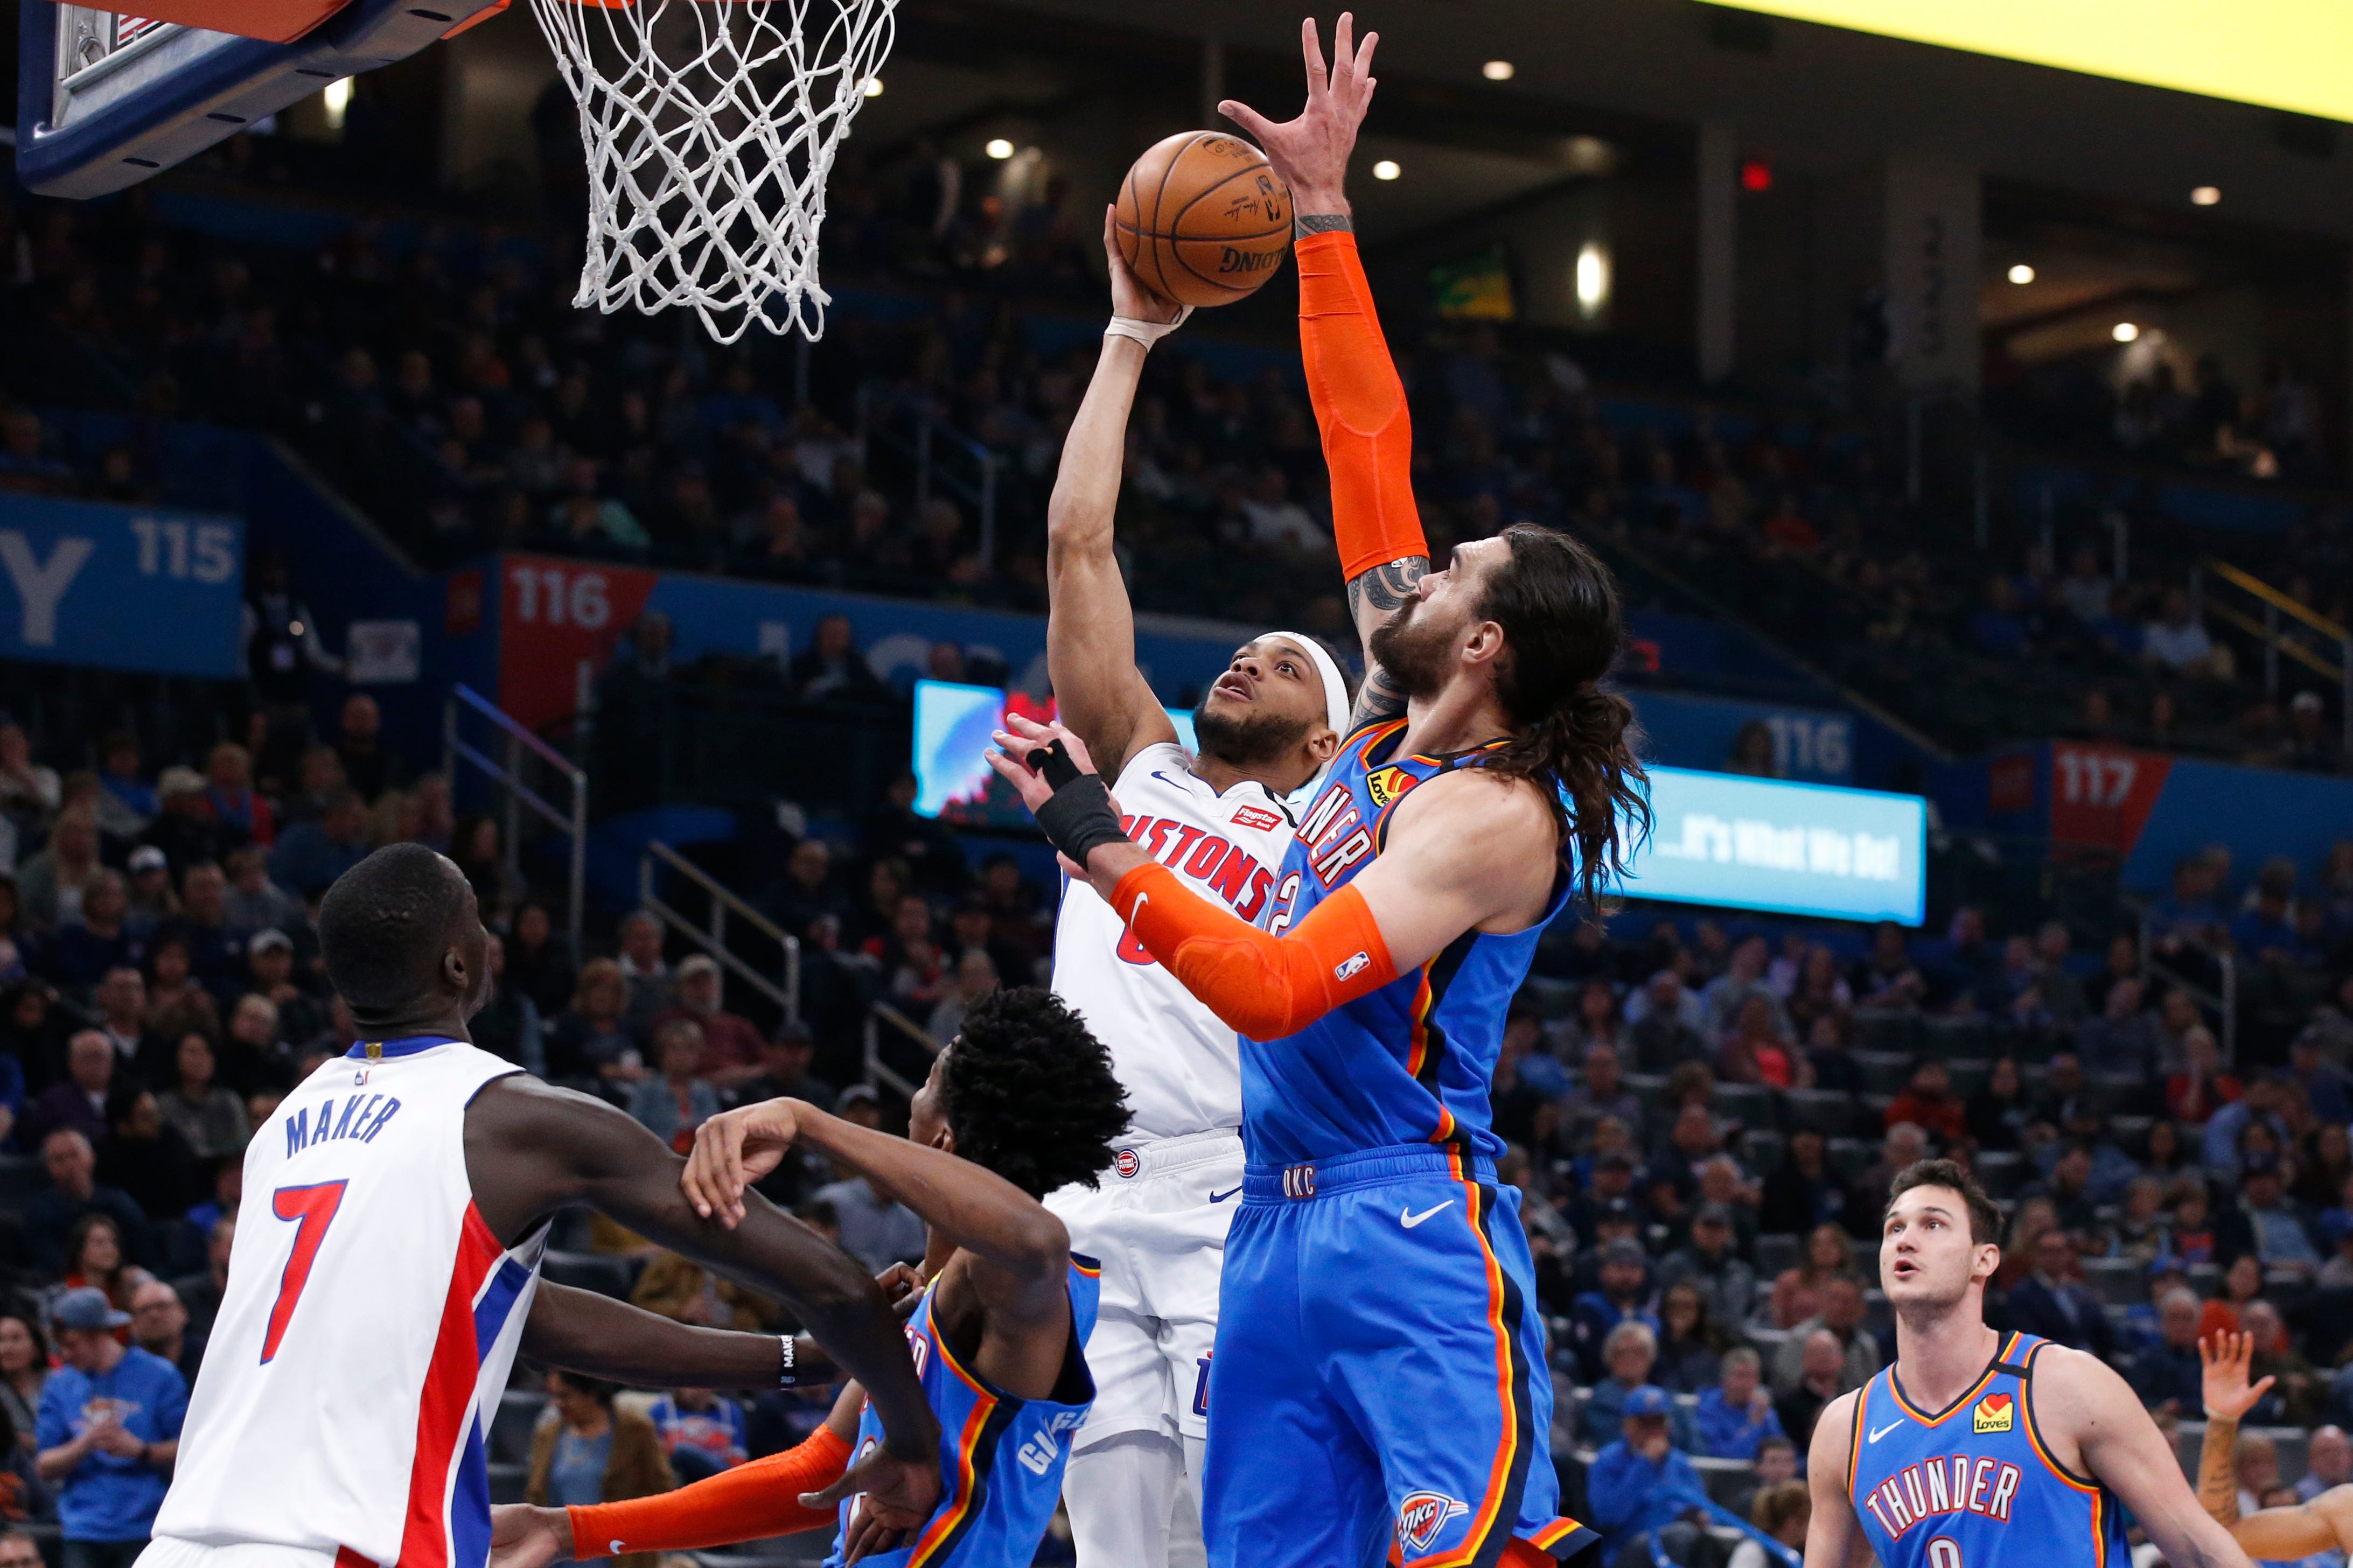 Detroit Pistons guard Bruce Brown, top left, shoots as Oklahoma City Thunder center Steven Adams defends during the first half of an NBA basketball game.